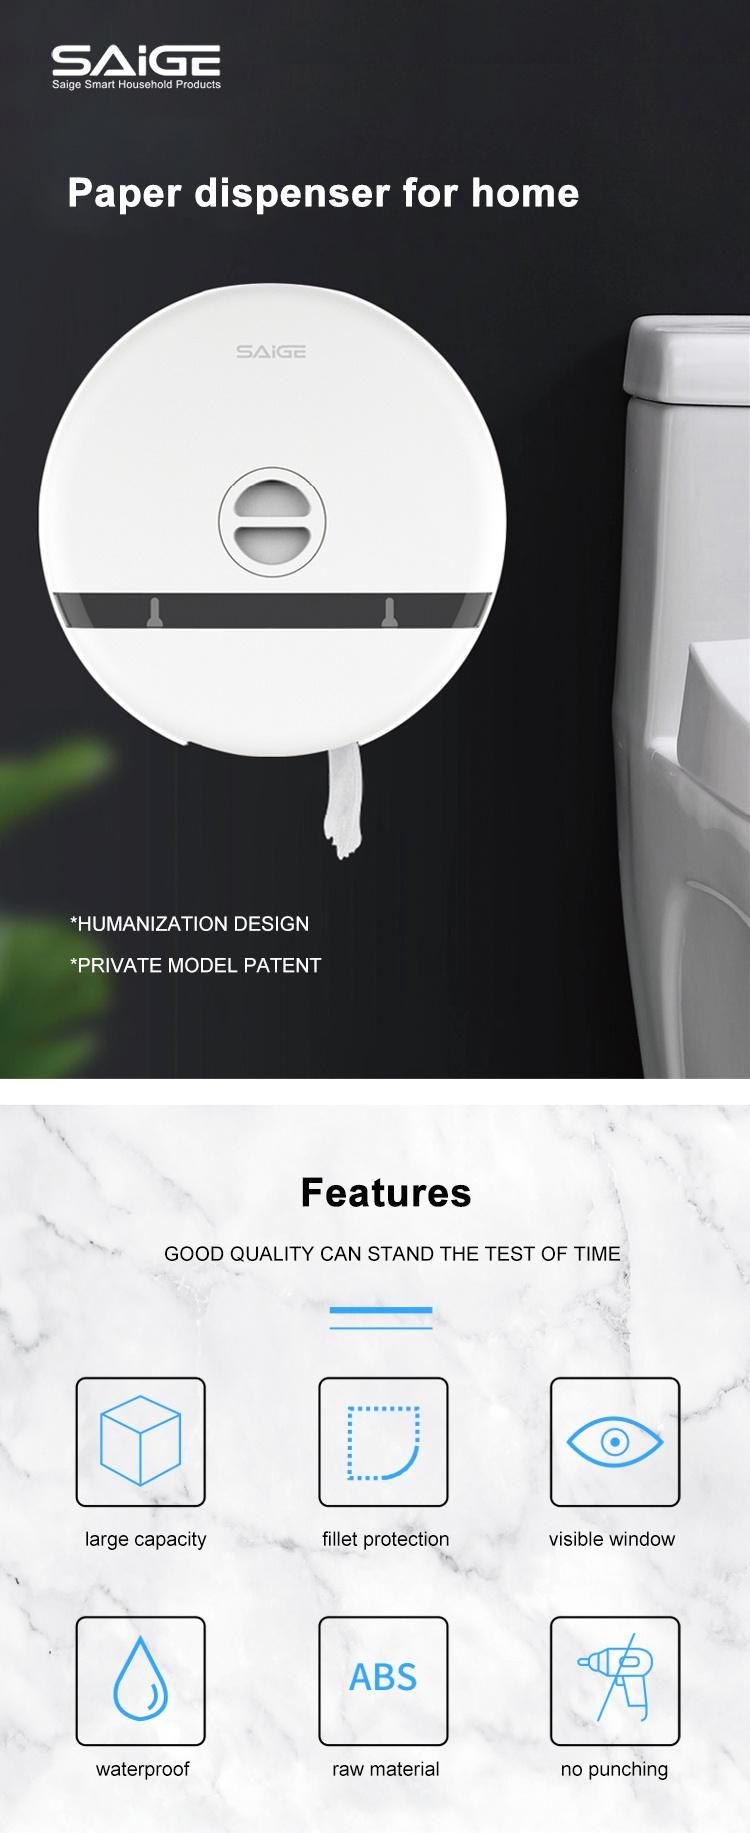 Saige Wall Mounted High Quality ABS Plastic Jumbo Toilet Paper Dispenser